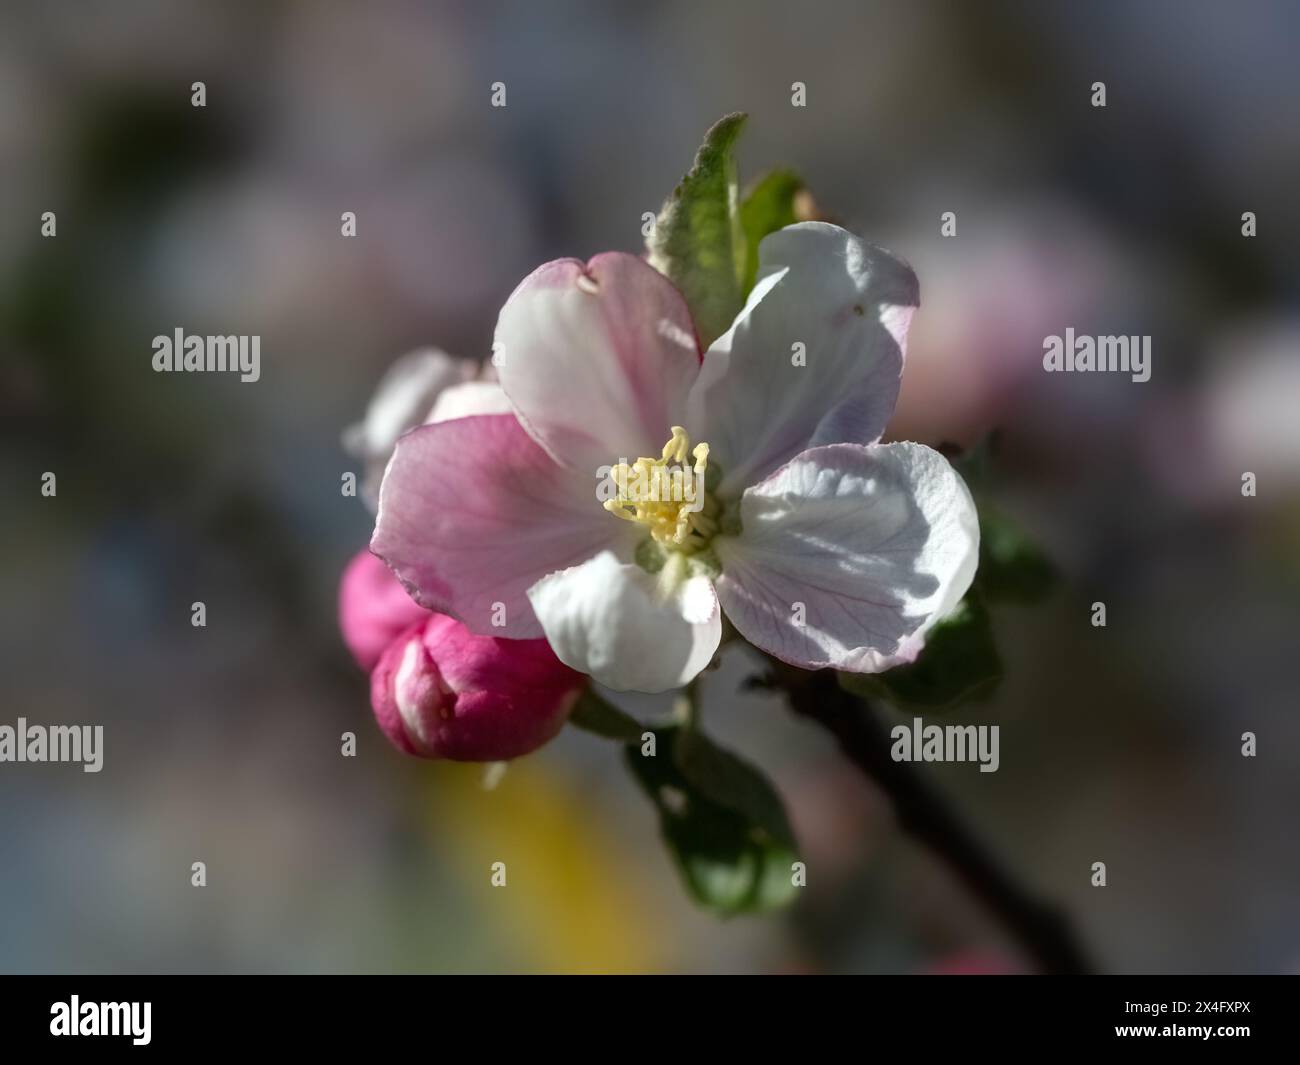 Closeup of Apple blossom flower of Malus domestica 'Red Gravenstein' in a garden in Spring Stock Photo